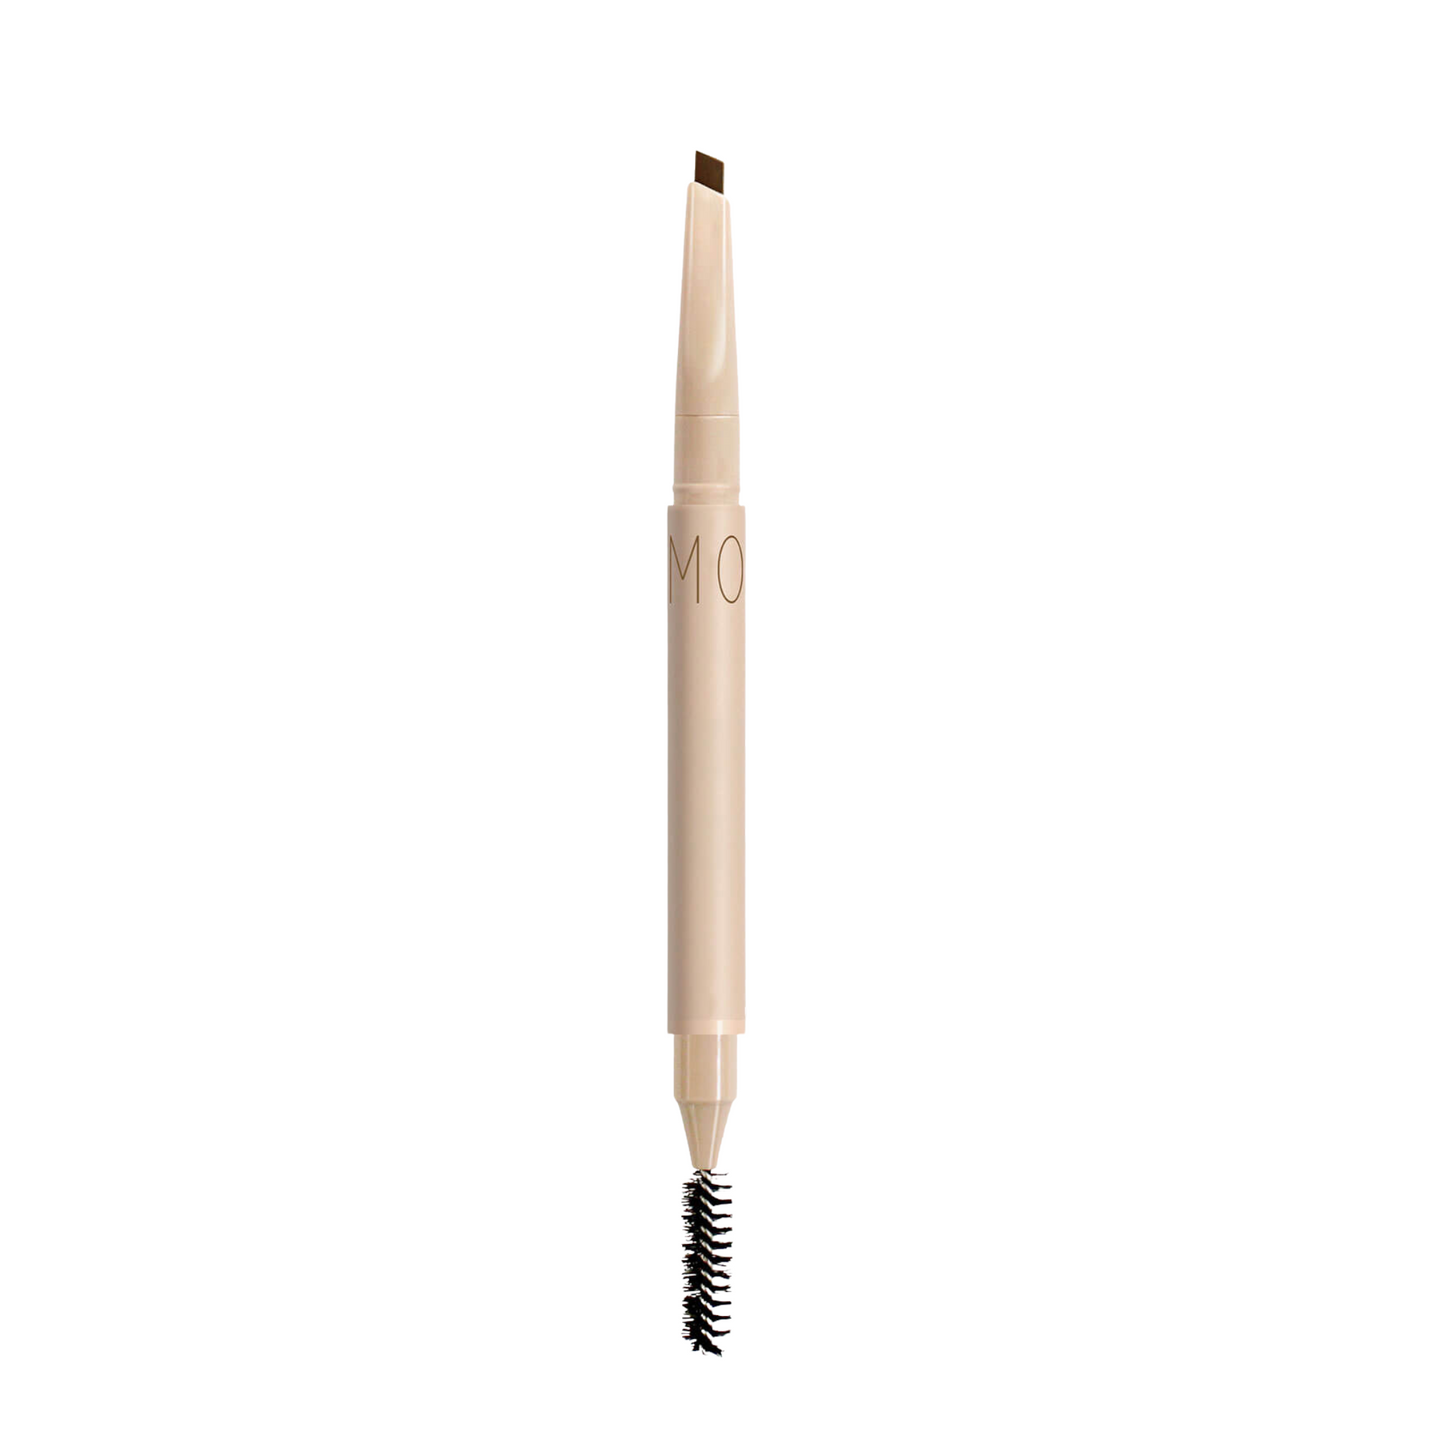 This eyebrow brush contains camellia extract, effective in controlling sebum secretion around the sensitive eye area for precise application.